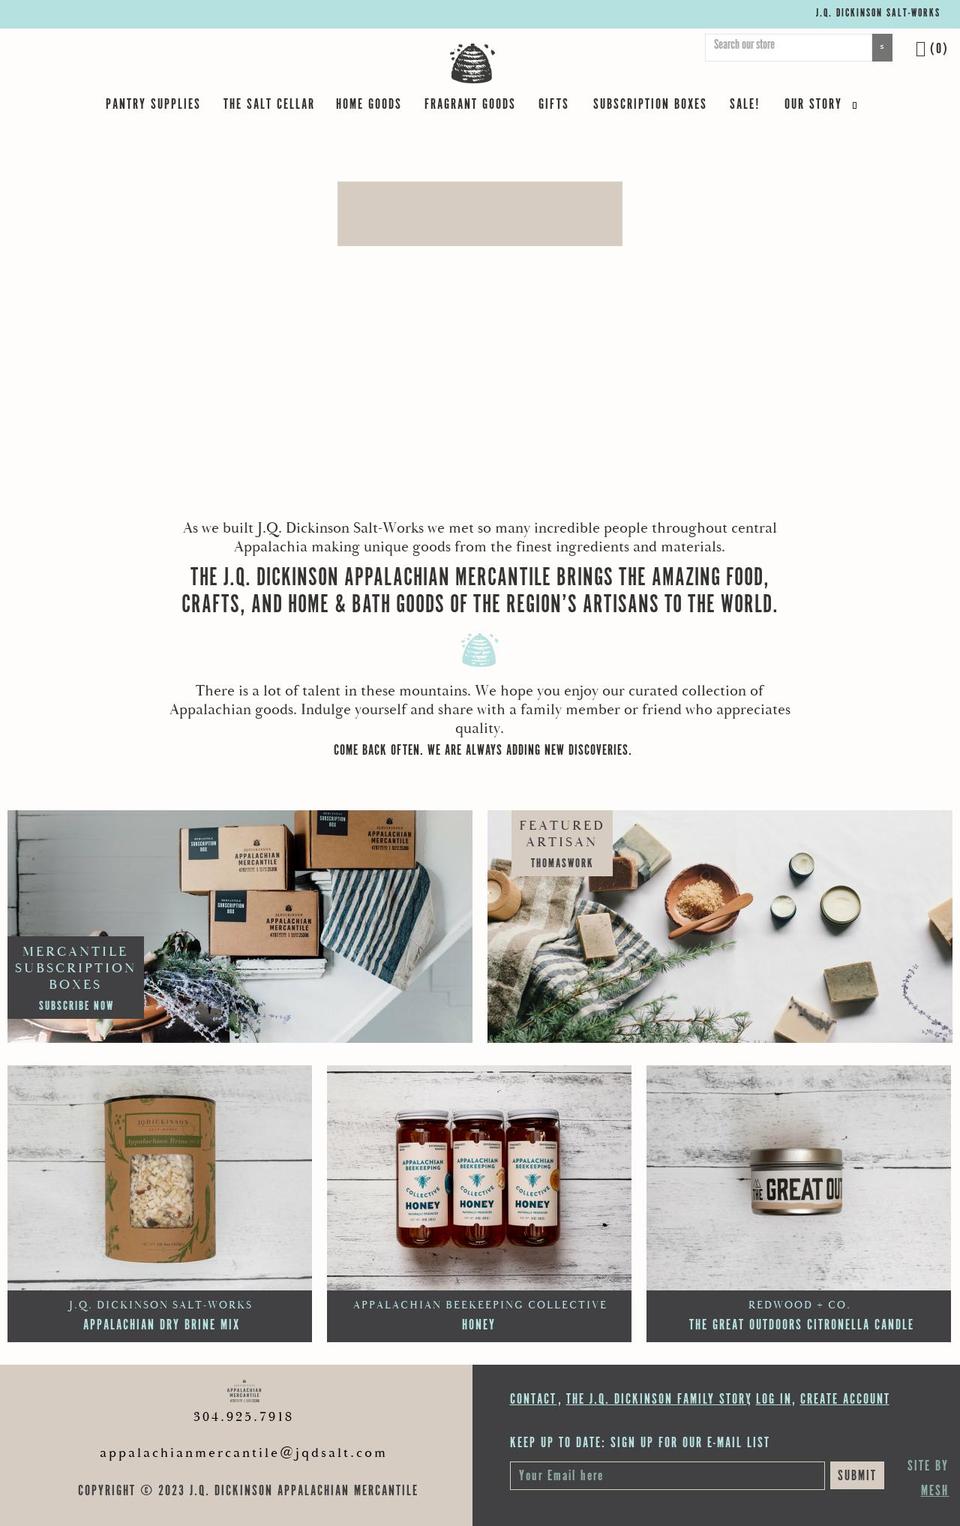 Timber Shopify theme site example jqdappalachianmercantile.com